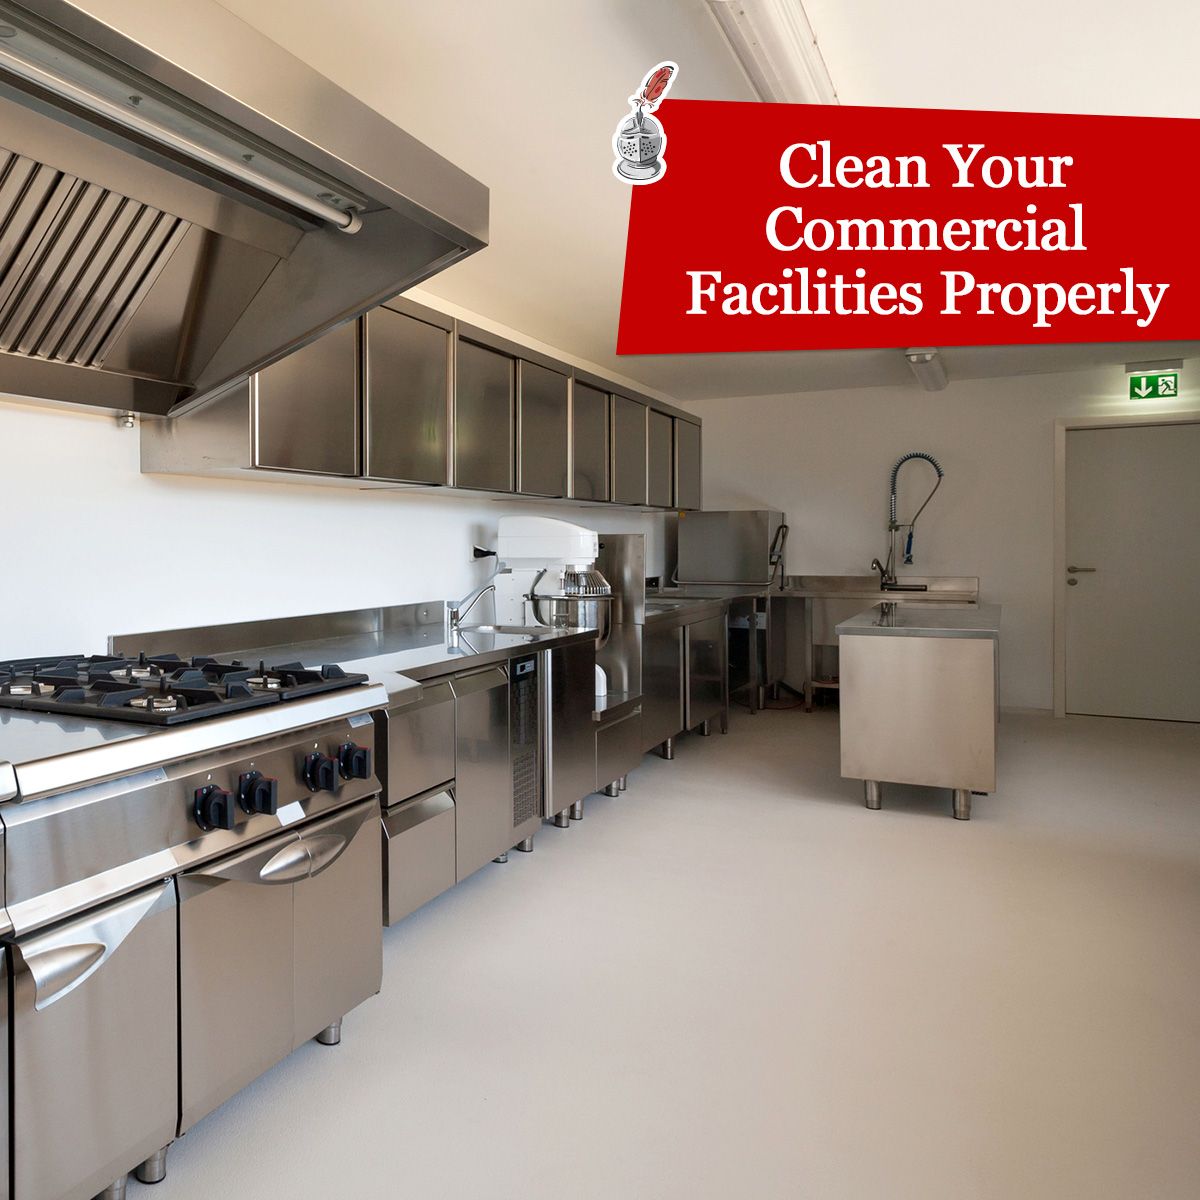 Clean Your Commercial Facilities Properly